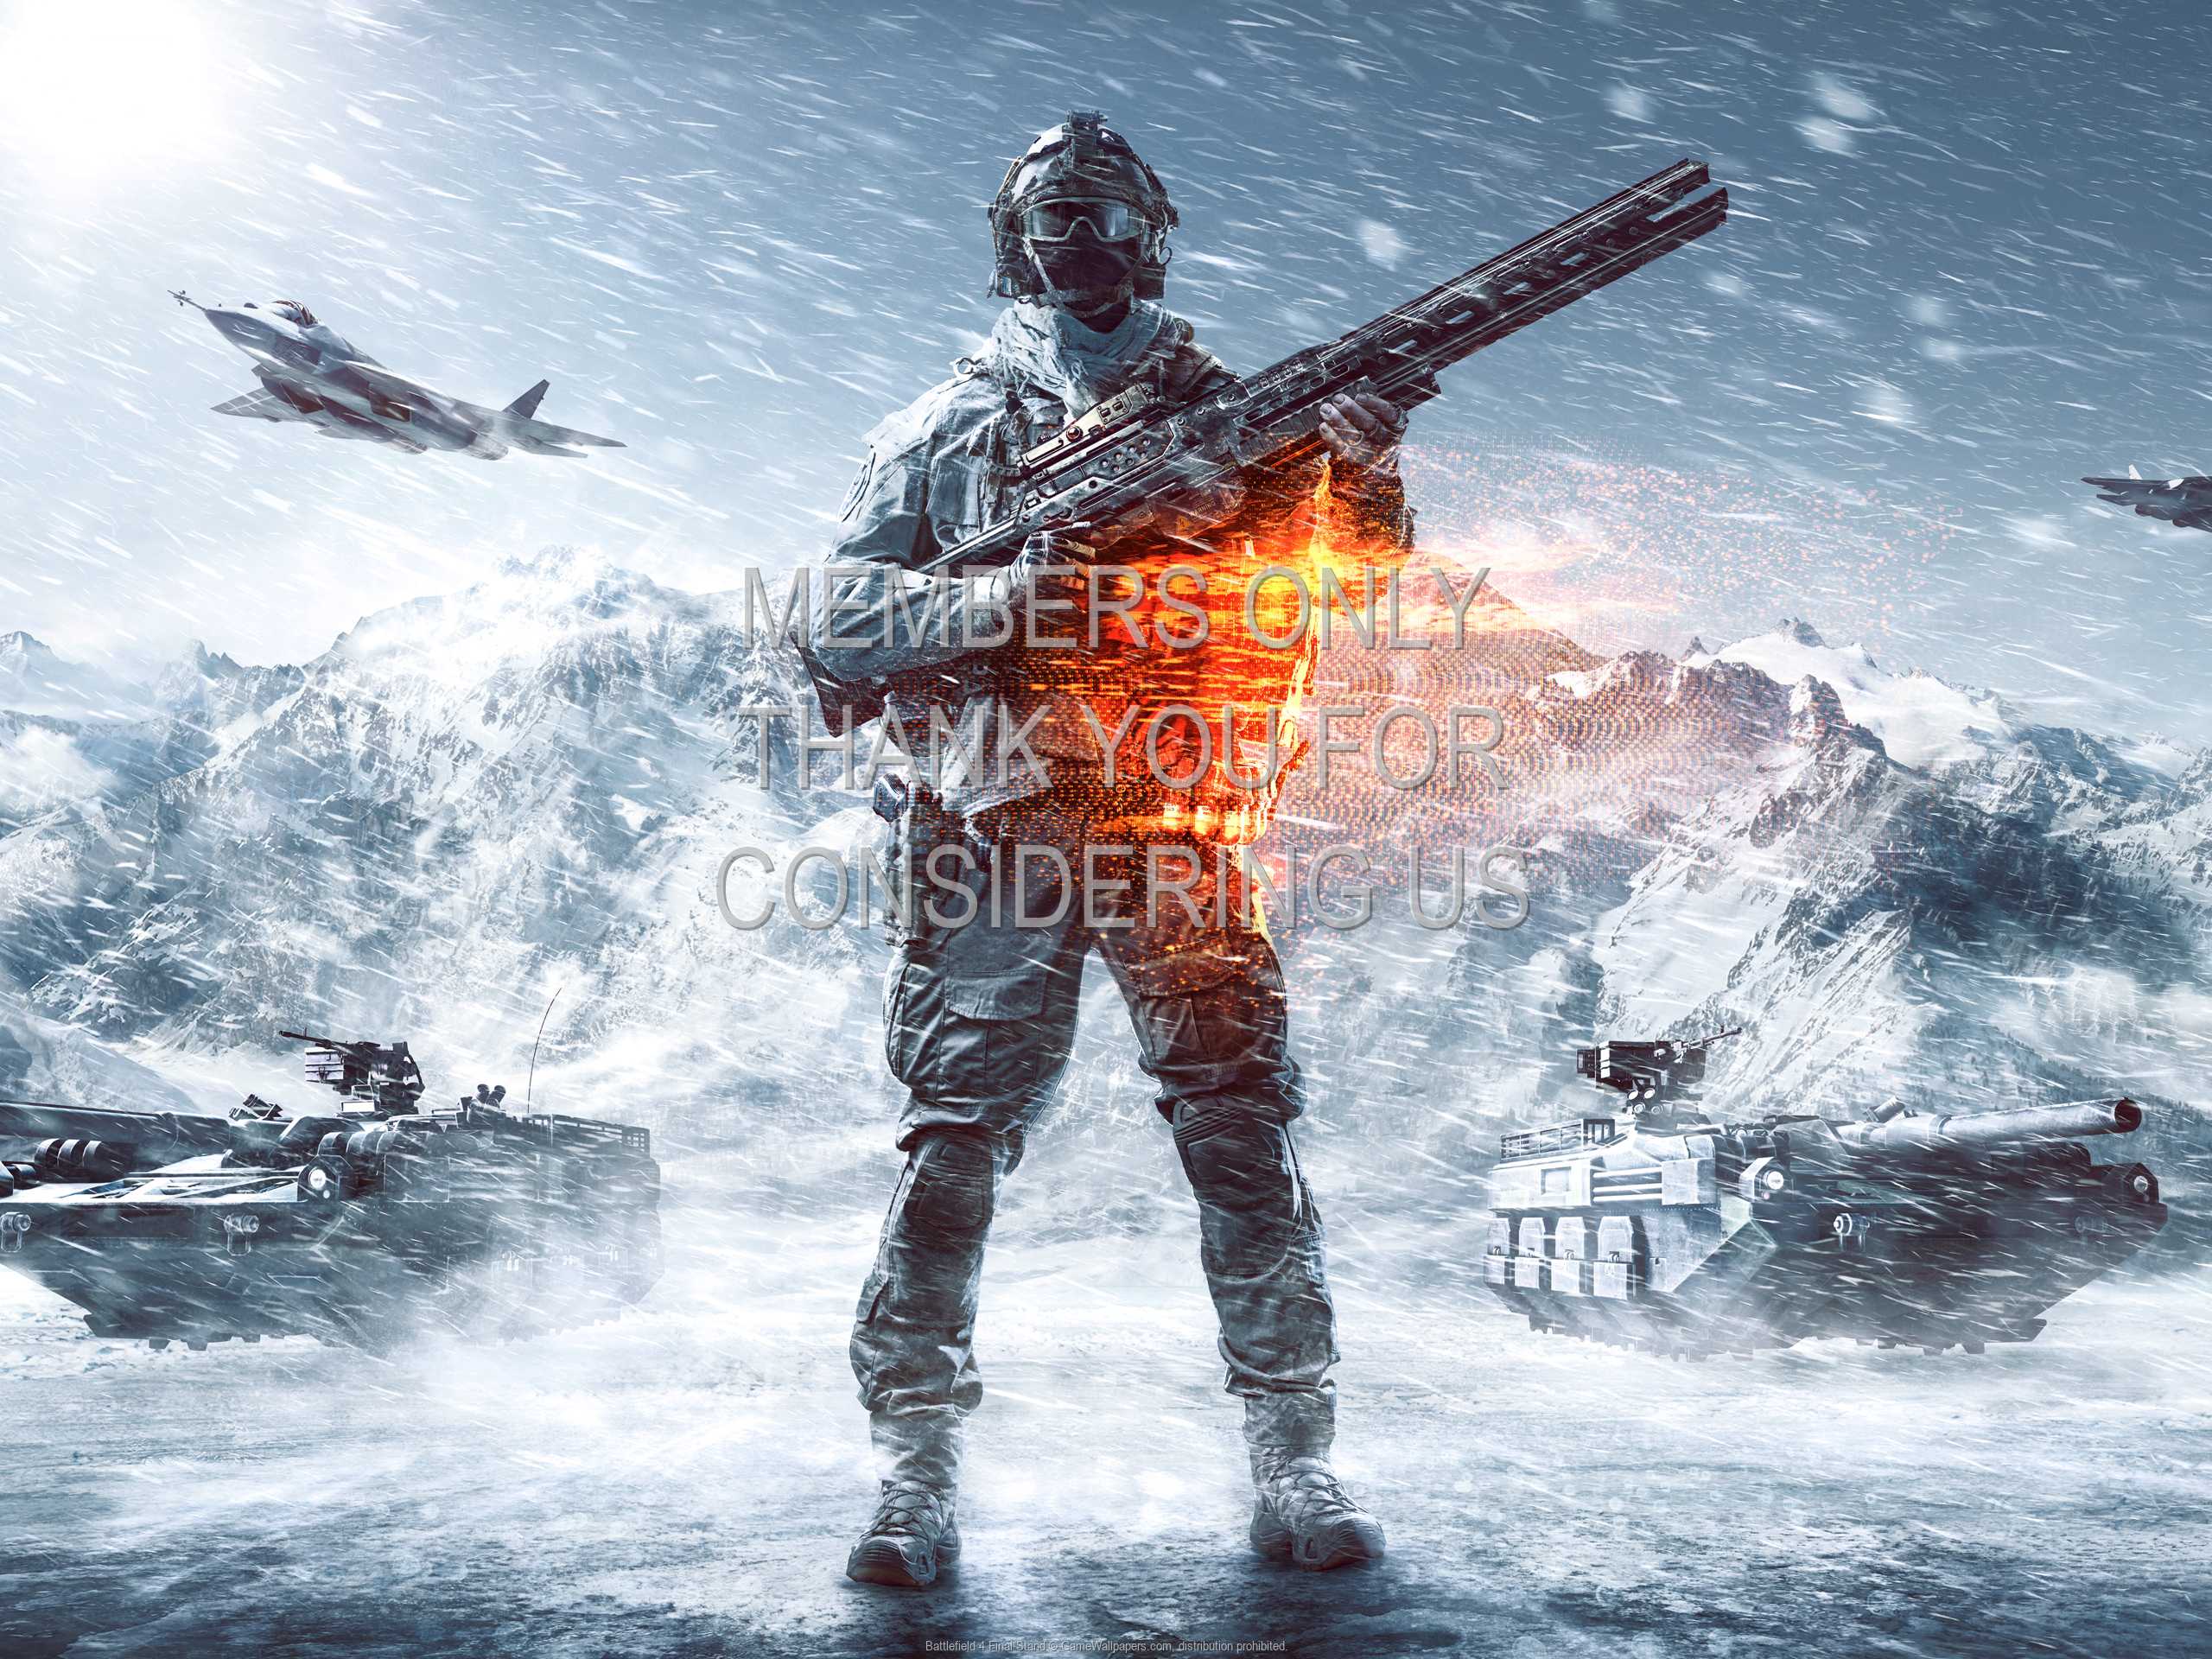 Battlefield 4: Final Stand 1080p Horizontal Mobile wallpaper or background 01